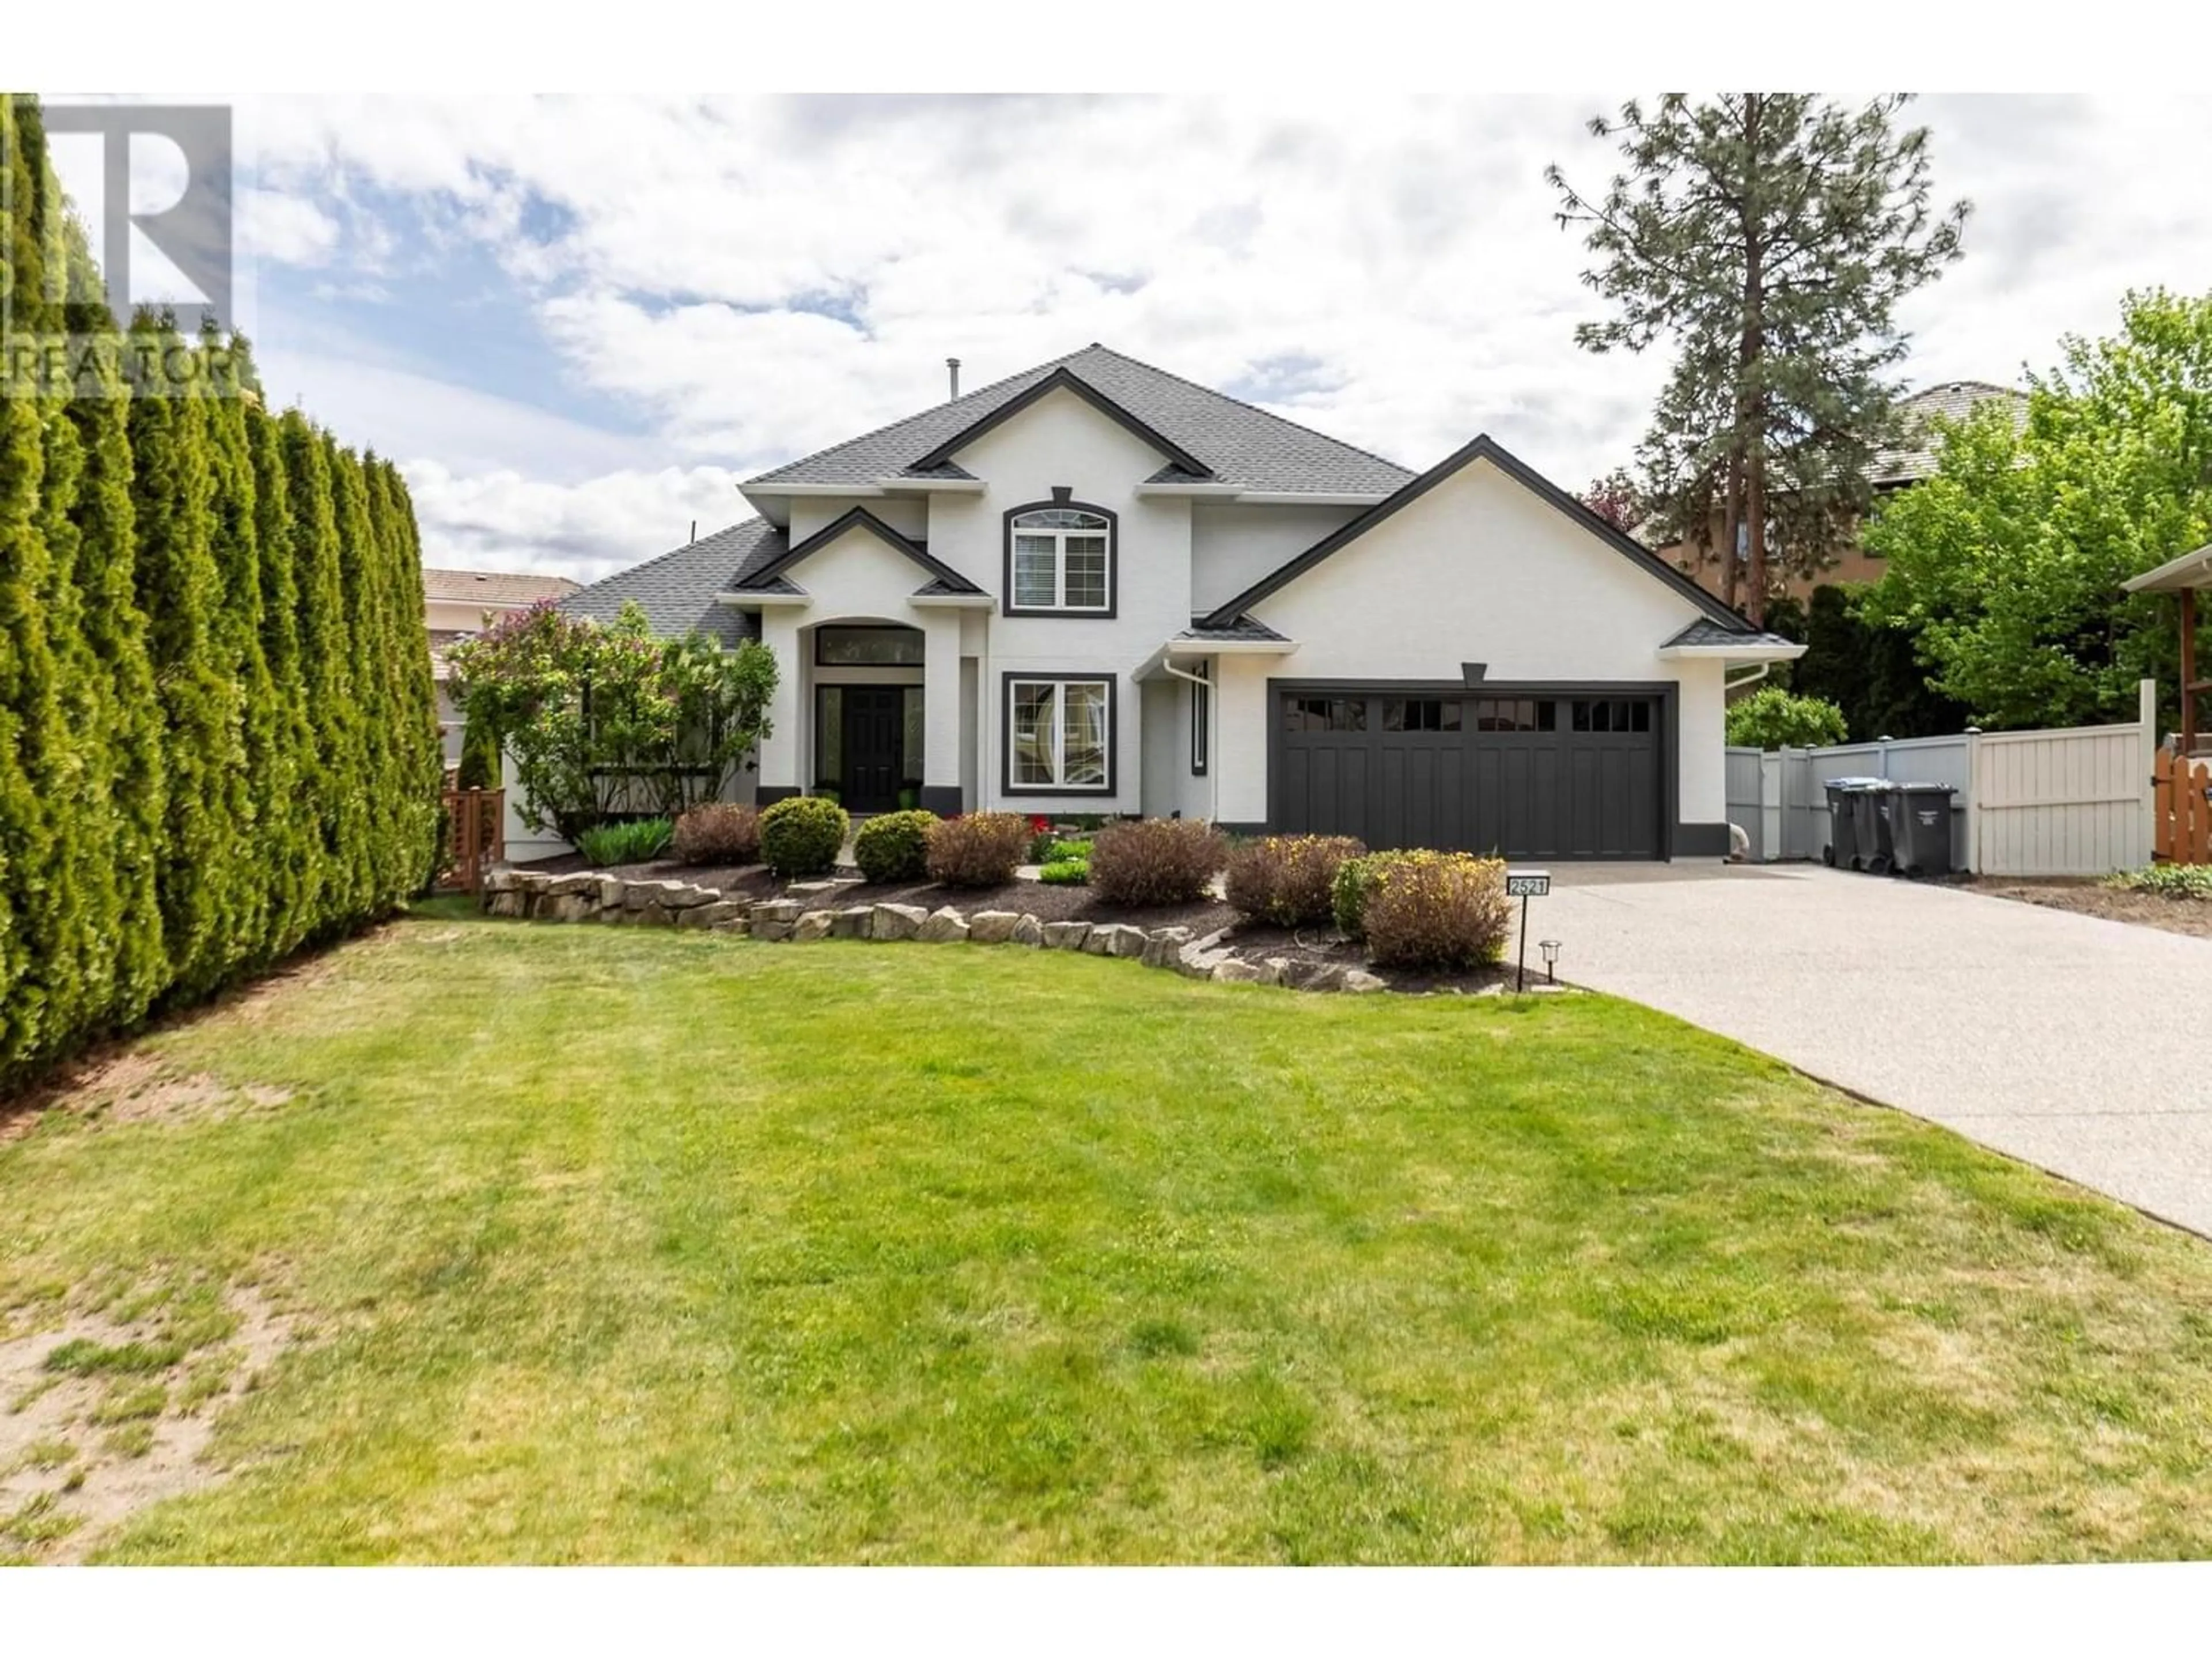 Frontside or backside of a home for 2521 Quail Place, Kelowna British Columbia V1V1Z8